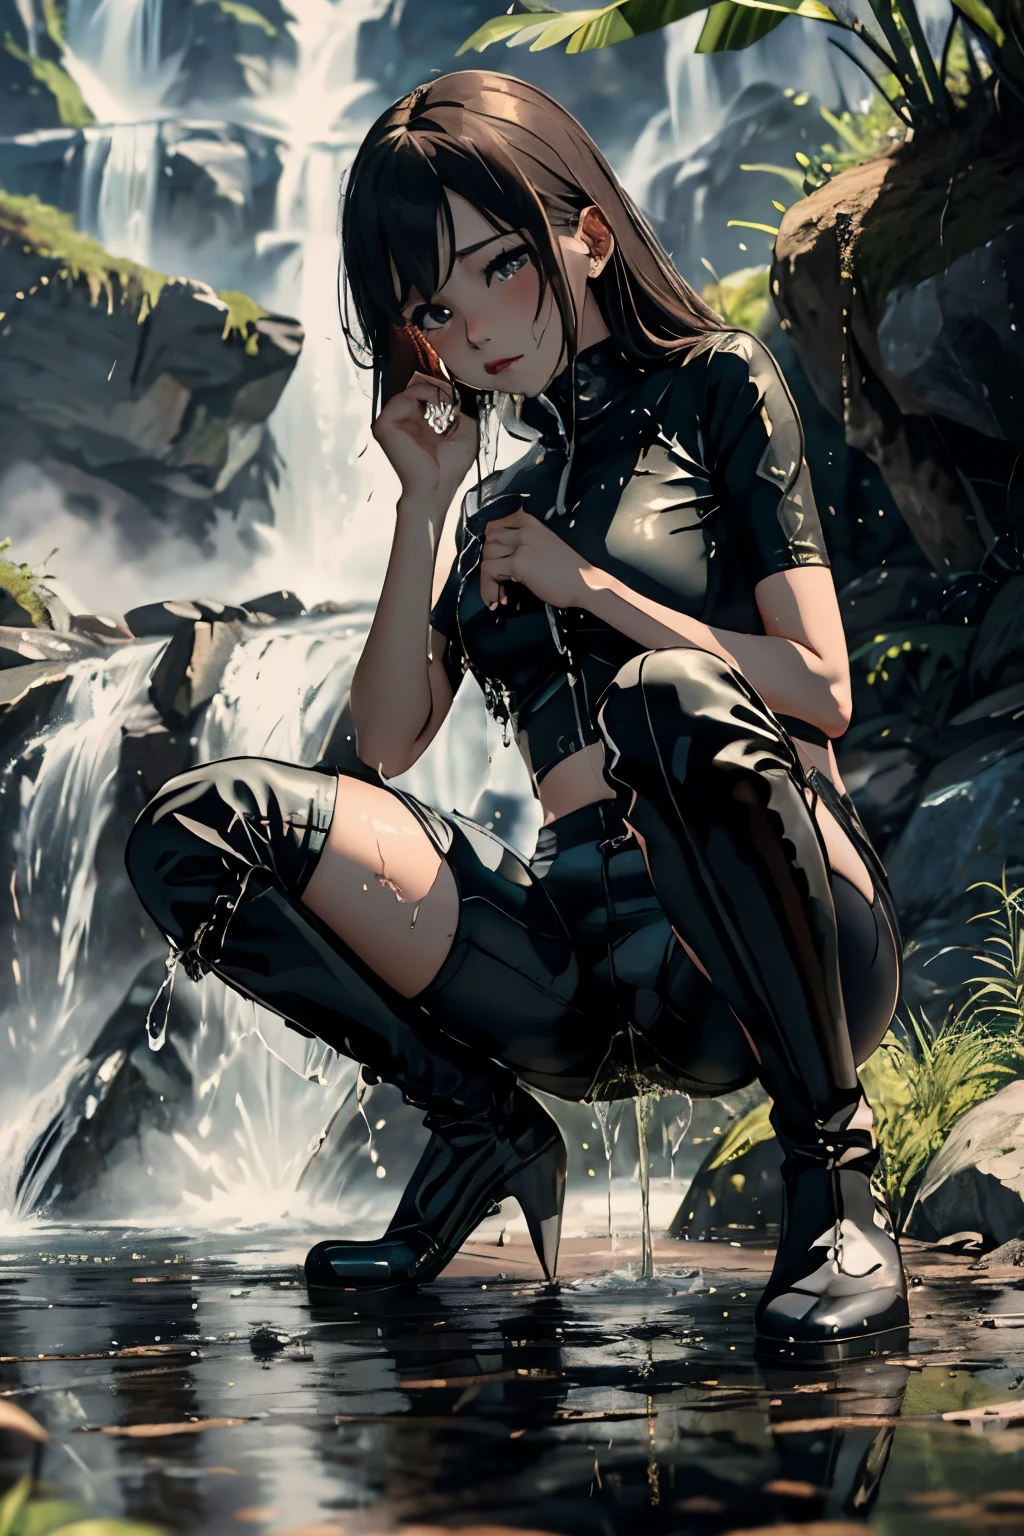 anime, best quality, high quality, highres, beautiful women, high detail, good lighting, lewd, hentai, (no nudity), (((((bike shorts))))), (((leather thigh high boots))), bare midriff, (wet shorts), (((wetting herself))), (((peeing herself))), (((peeing self))), (pee streaming down legs), peeing stain, (puddle), (thick thighs), nice long legs, lipstick, detailed face, pretty face, pretty hands, embarrassed blushing face, humiliated, ((legs spread)), (squatting), ((at a waterfall)), hihelz